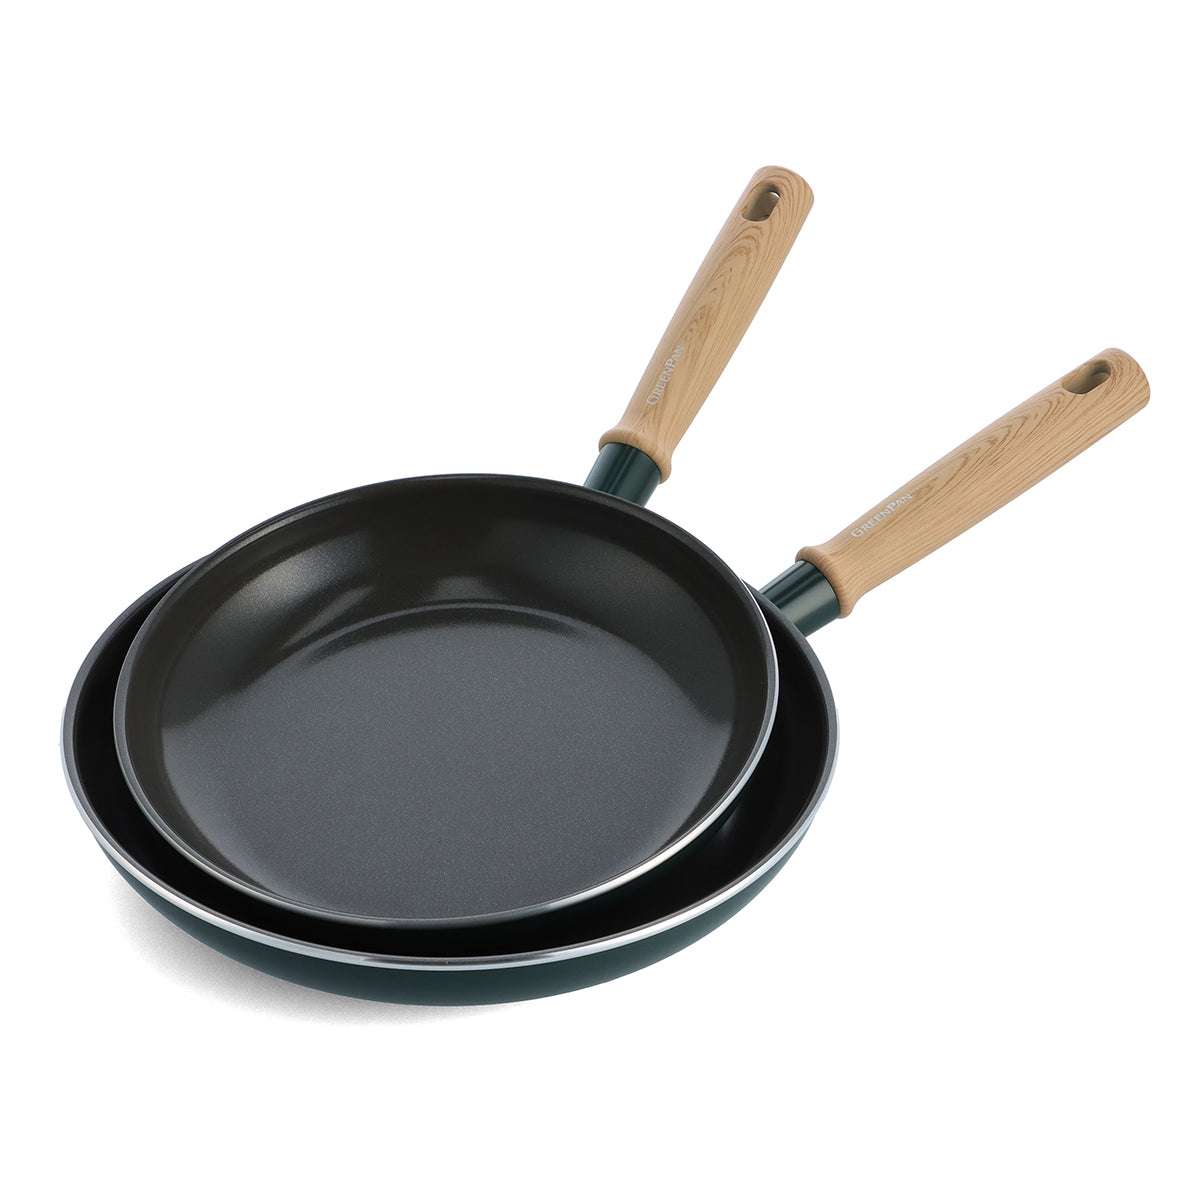 Hudson Ceramic Nonstick 9.5" and 11" Frypan Set | Forest Green